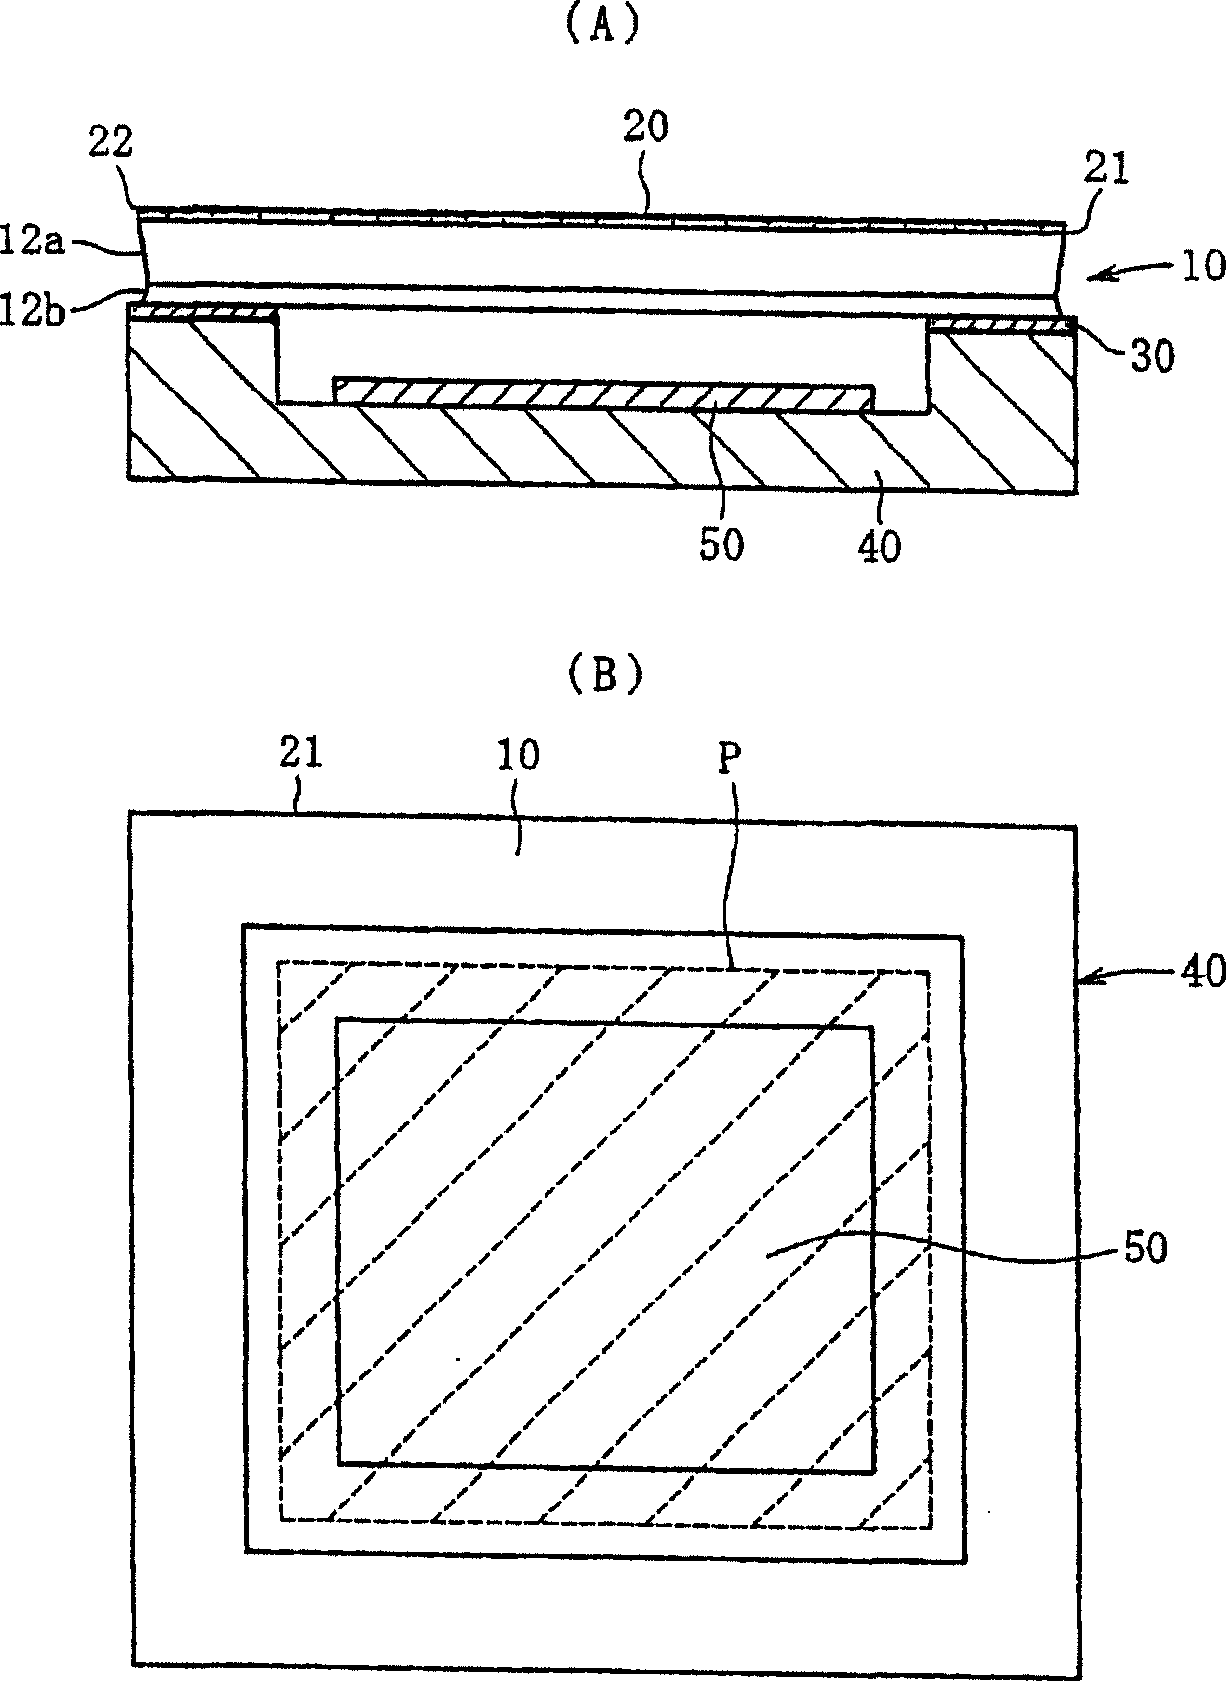 Cover glass for solid imaging device, and its manufacturing method